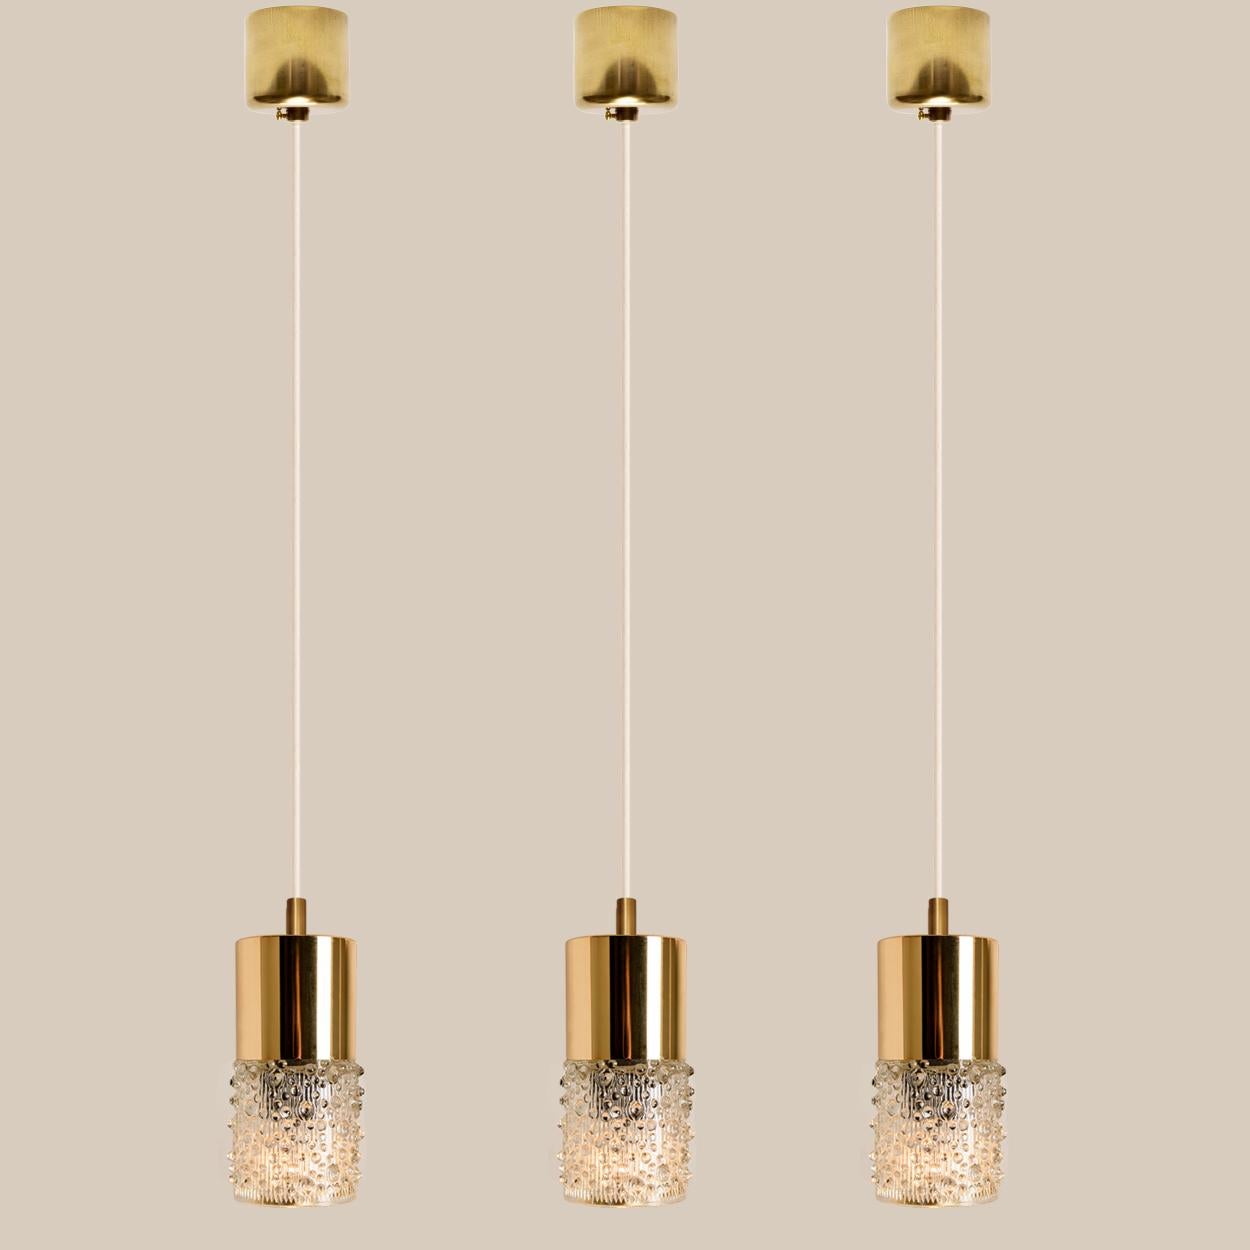 Mid-Century Modern Pressed Glass and Brass Pendant Lights, 1970s For Sale